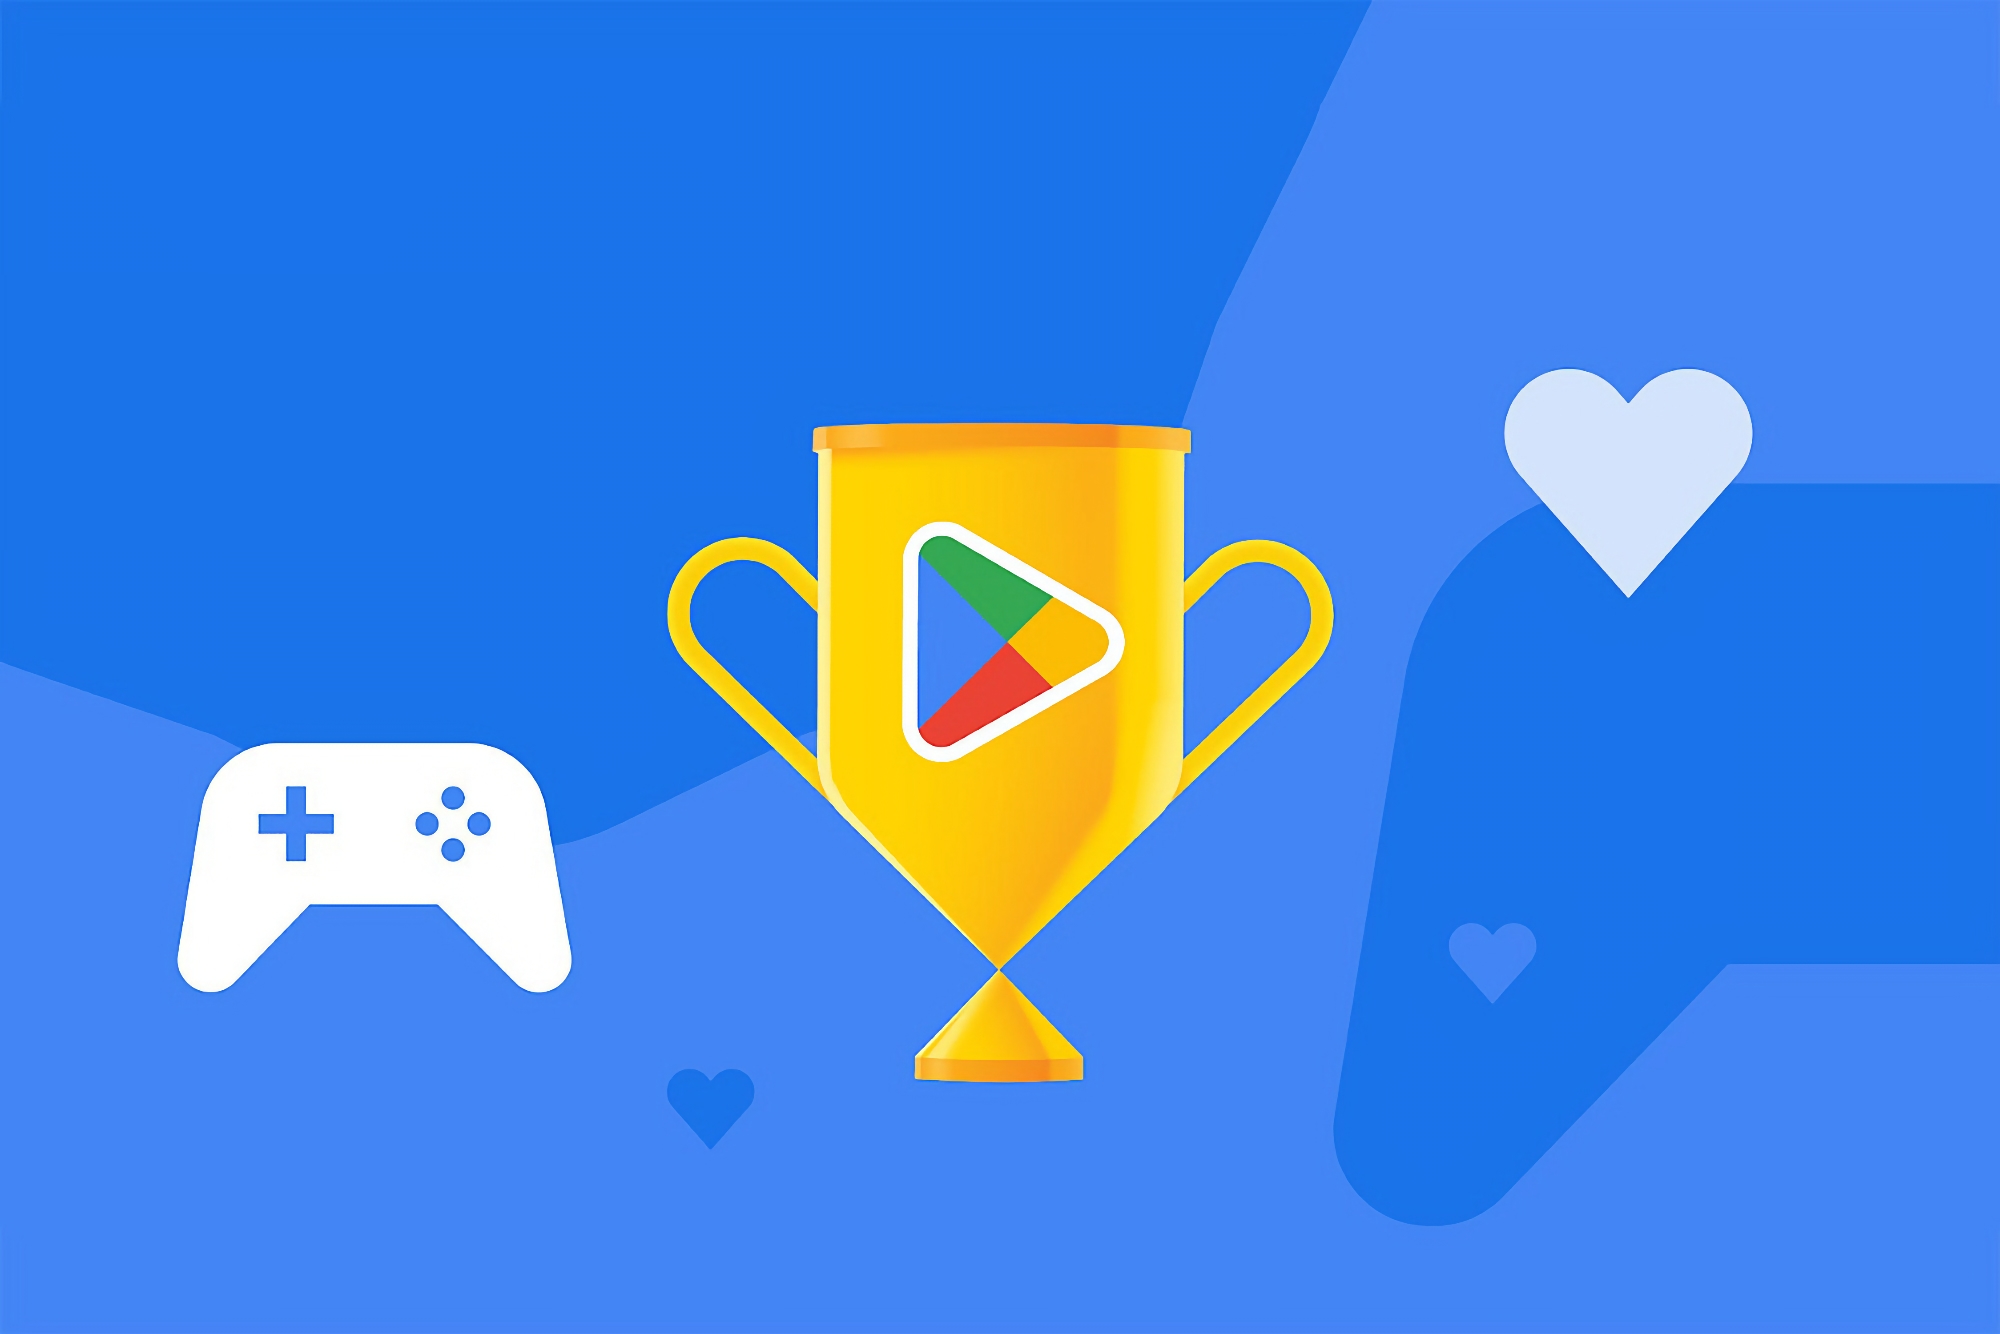 Apex Legends Mobile, Diablo Immortal, Ukulele by Yousician, and PicCollage: Voting for the best game and Android app of 2022 has started on the Google Play Store